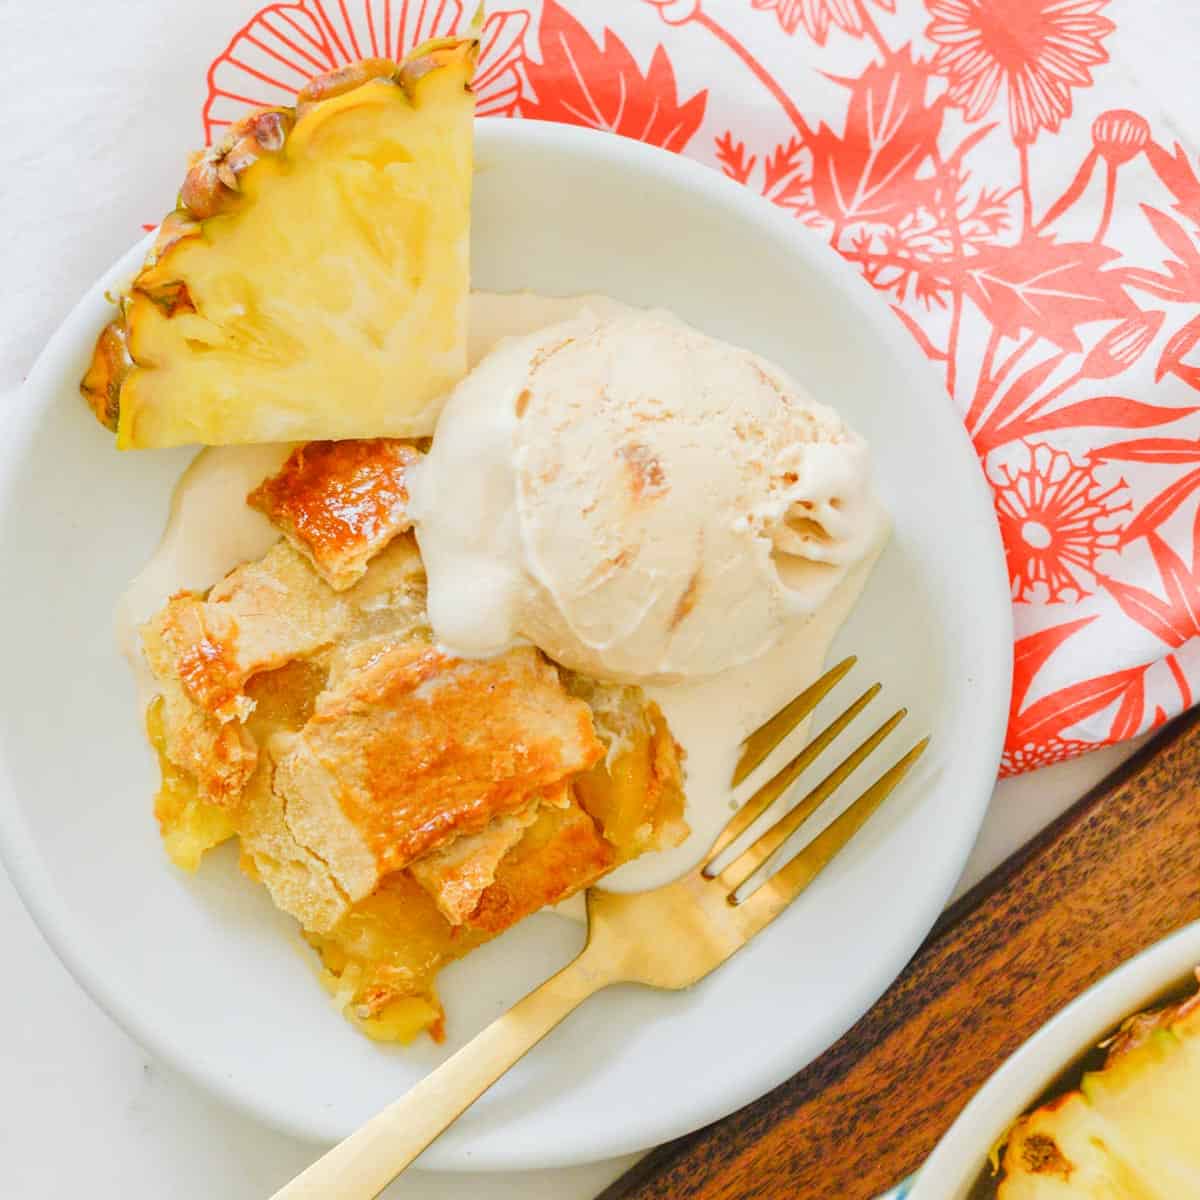 a slice of pineapple pie served with ice cream and a fresh pineapple